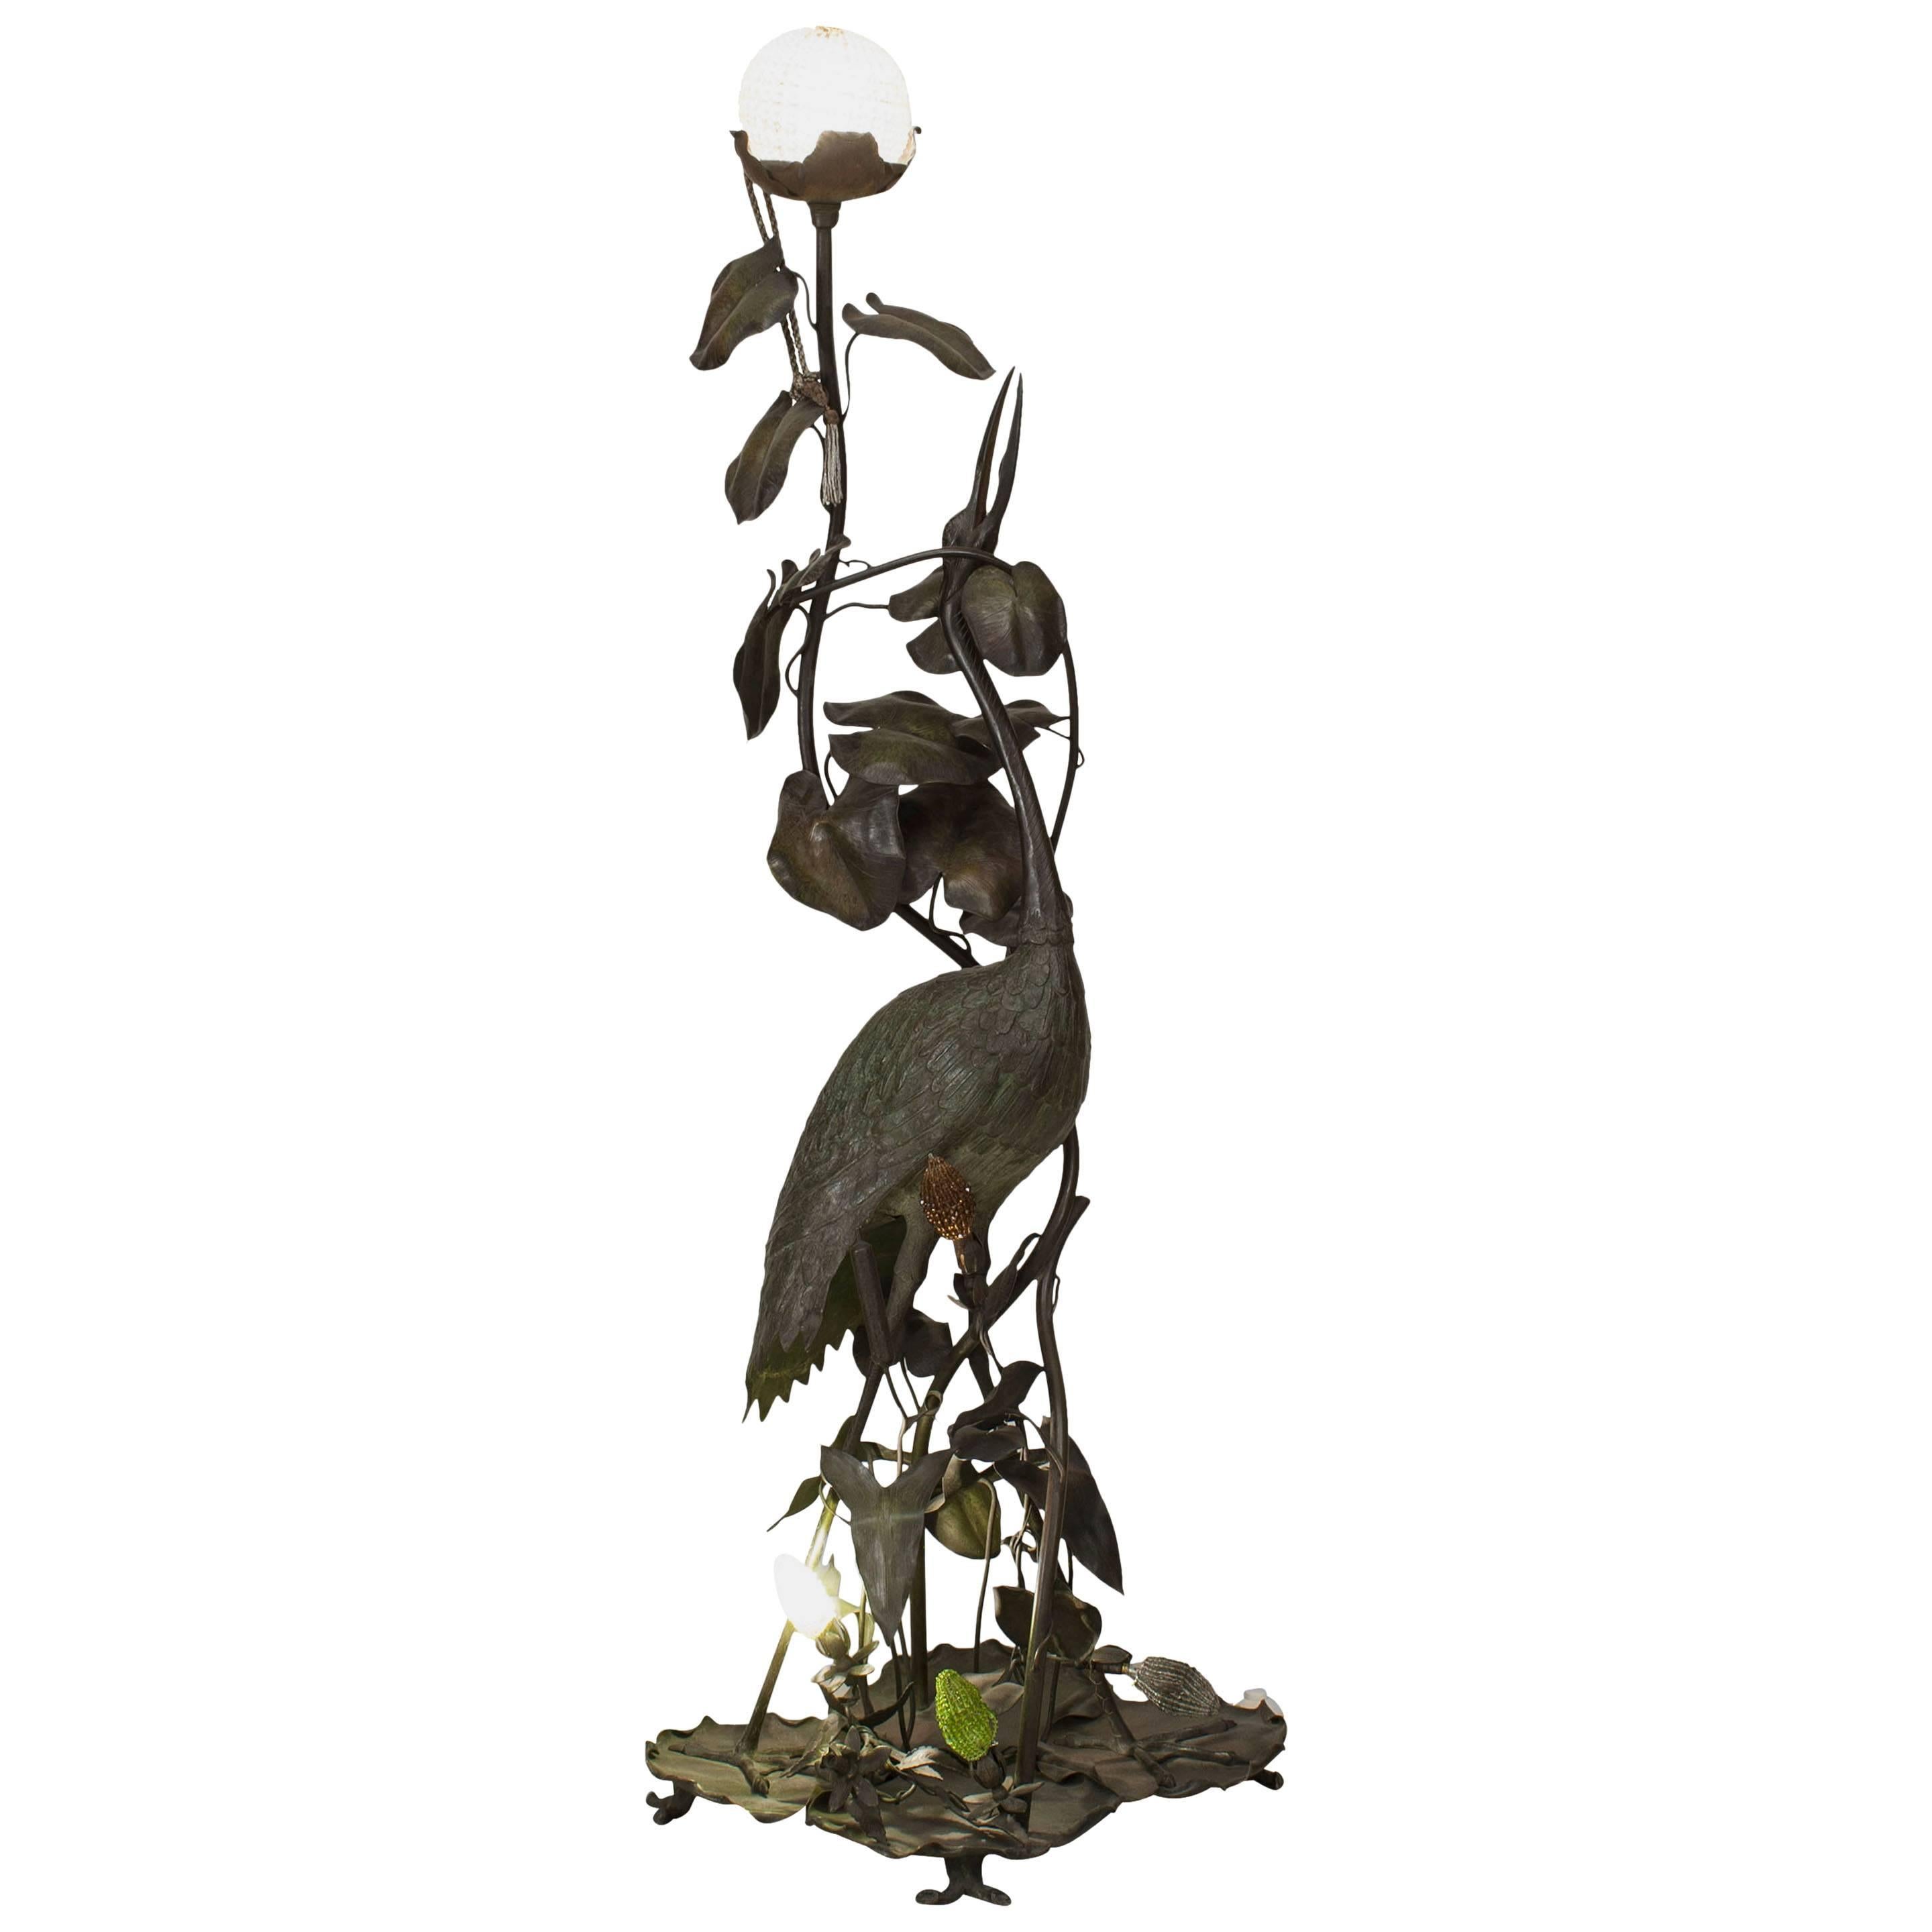 French Art Nouveau Cast Metal Floor Lamp Depicting a Heron with Lily Pads For Sale